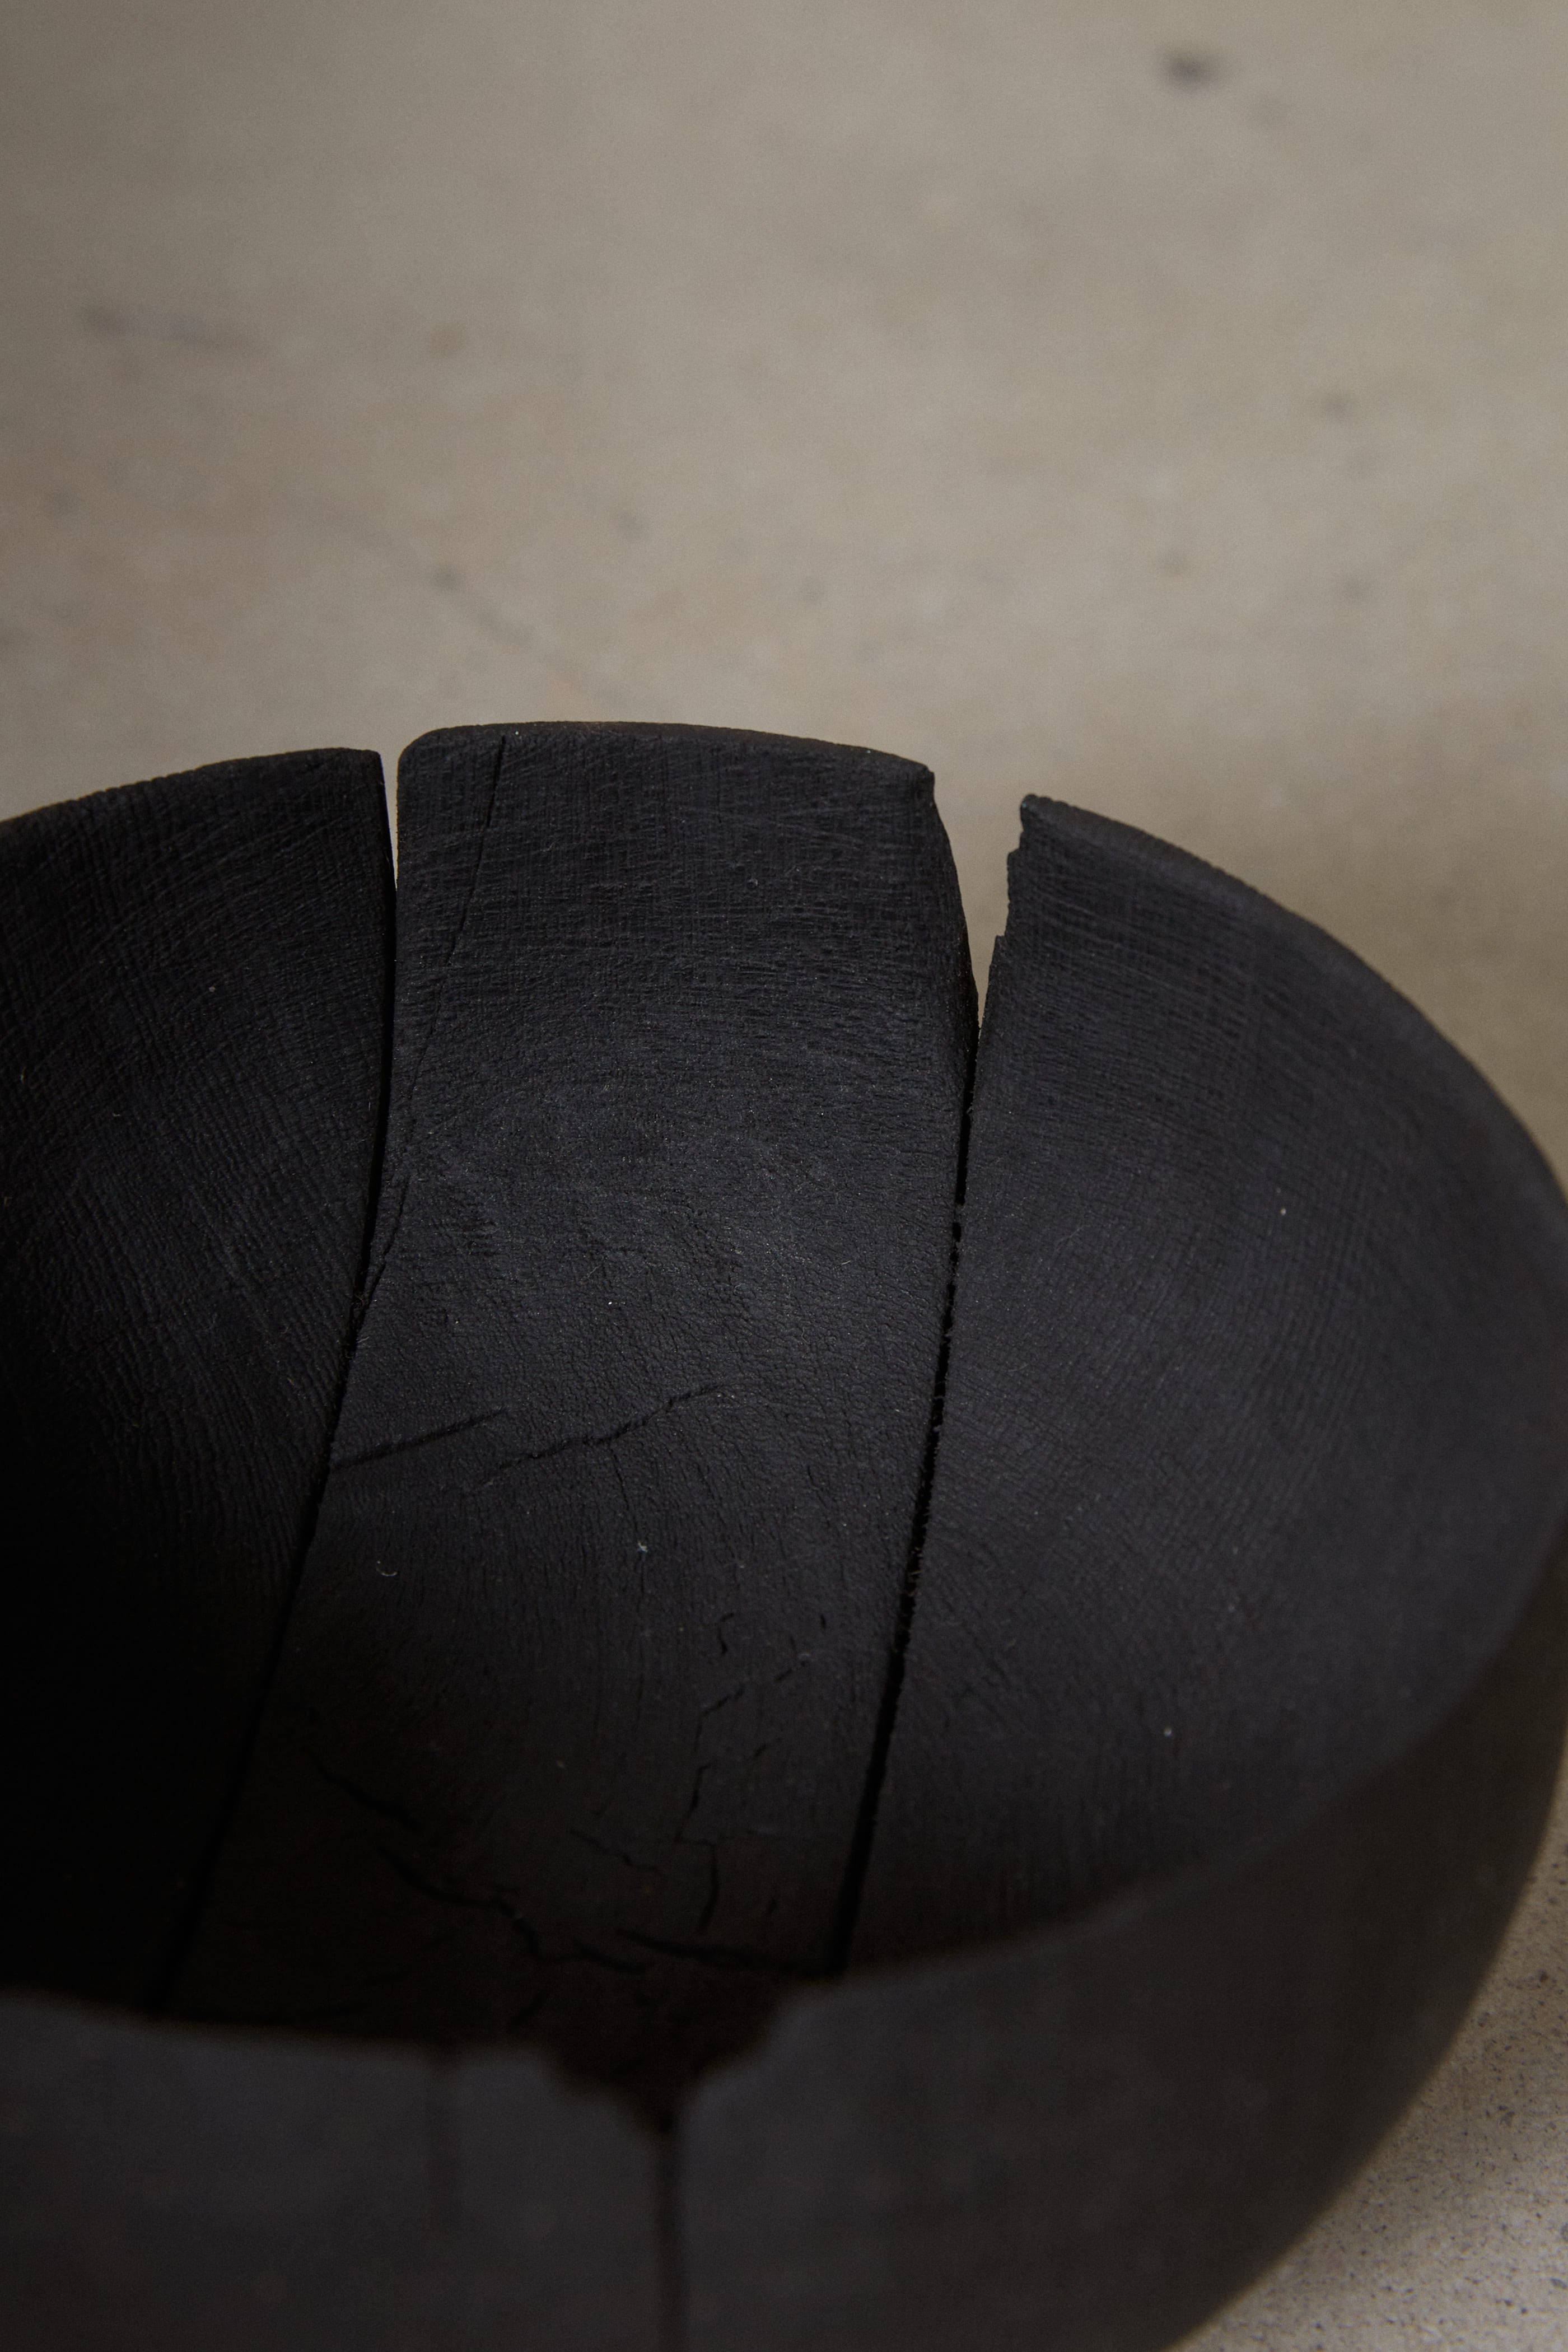 Rich matte black finish on raw edge footed black Yakisugi Bowl from CARMWORKS.